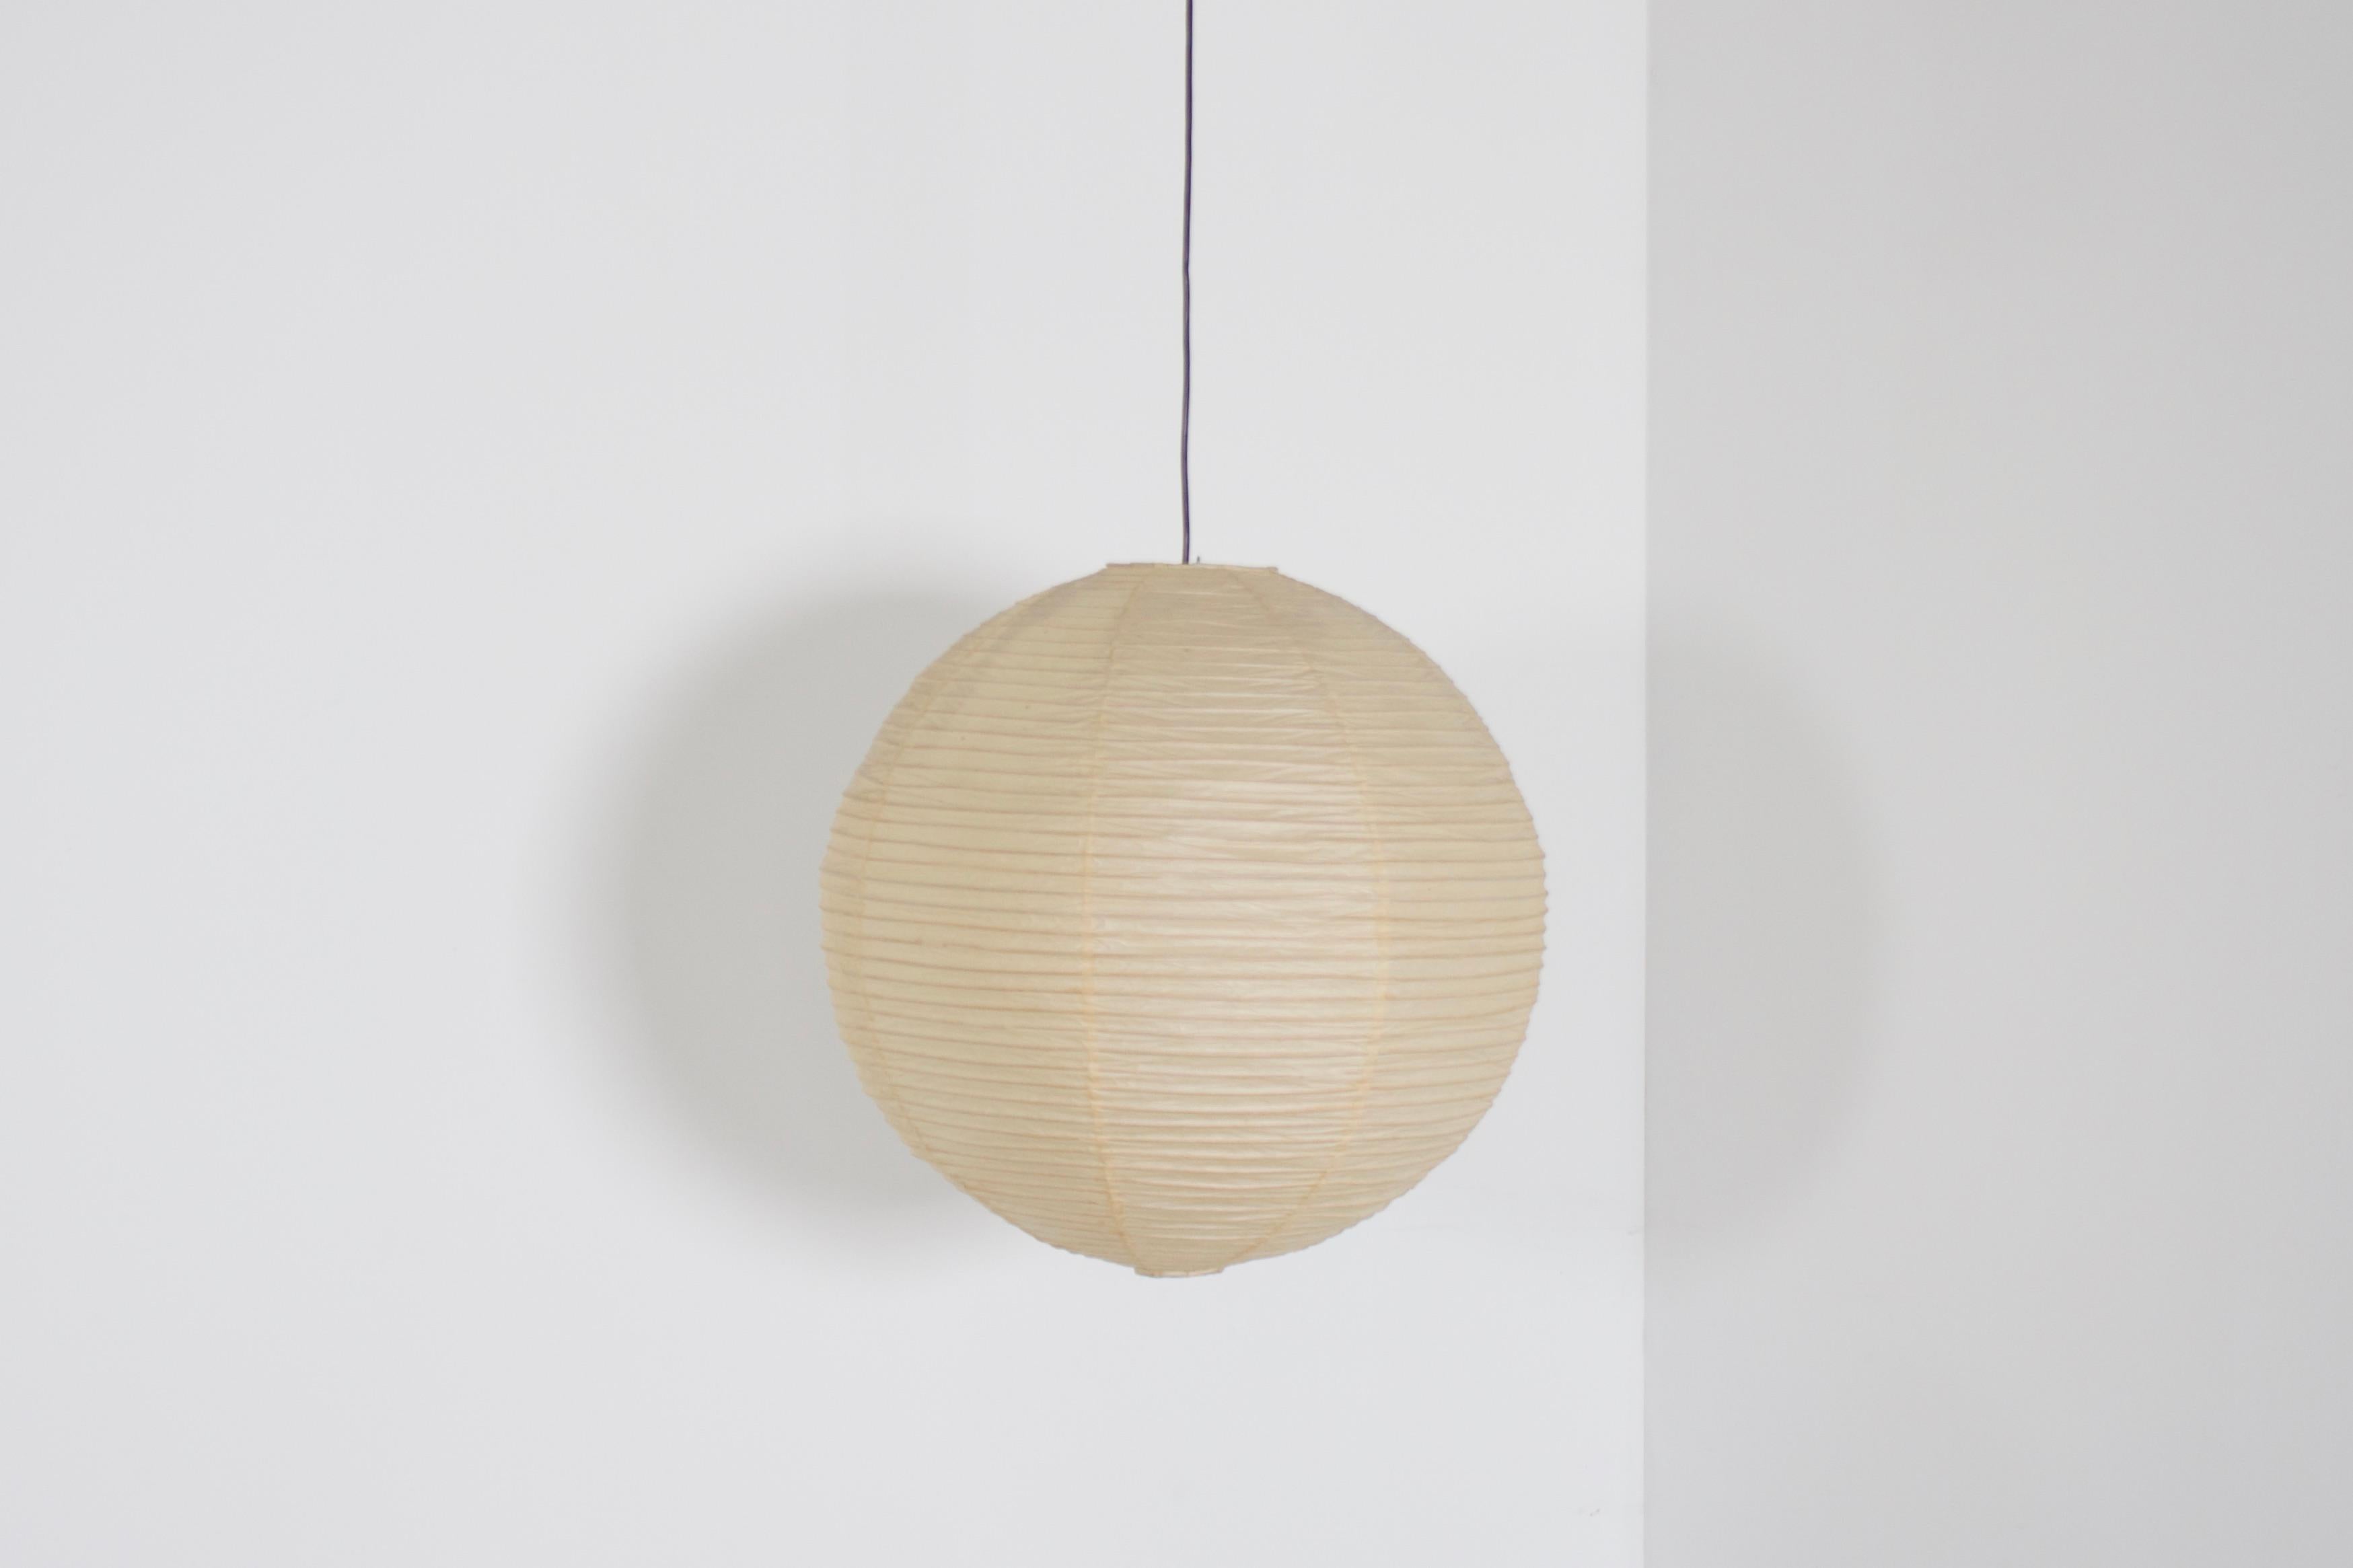 Early 19A Akari lamp in good condition.

Designed by Isamu Noguchi in 1951

Produced by Ozeki & Co., Ltd.

Measurements: 20 diameter × 20 height in / 51 × 51 cm

Model 19A was the first globe-shaped light in the Akari series, identifiable by the